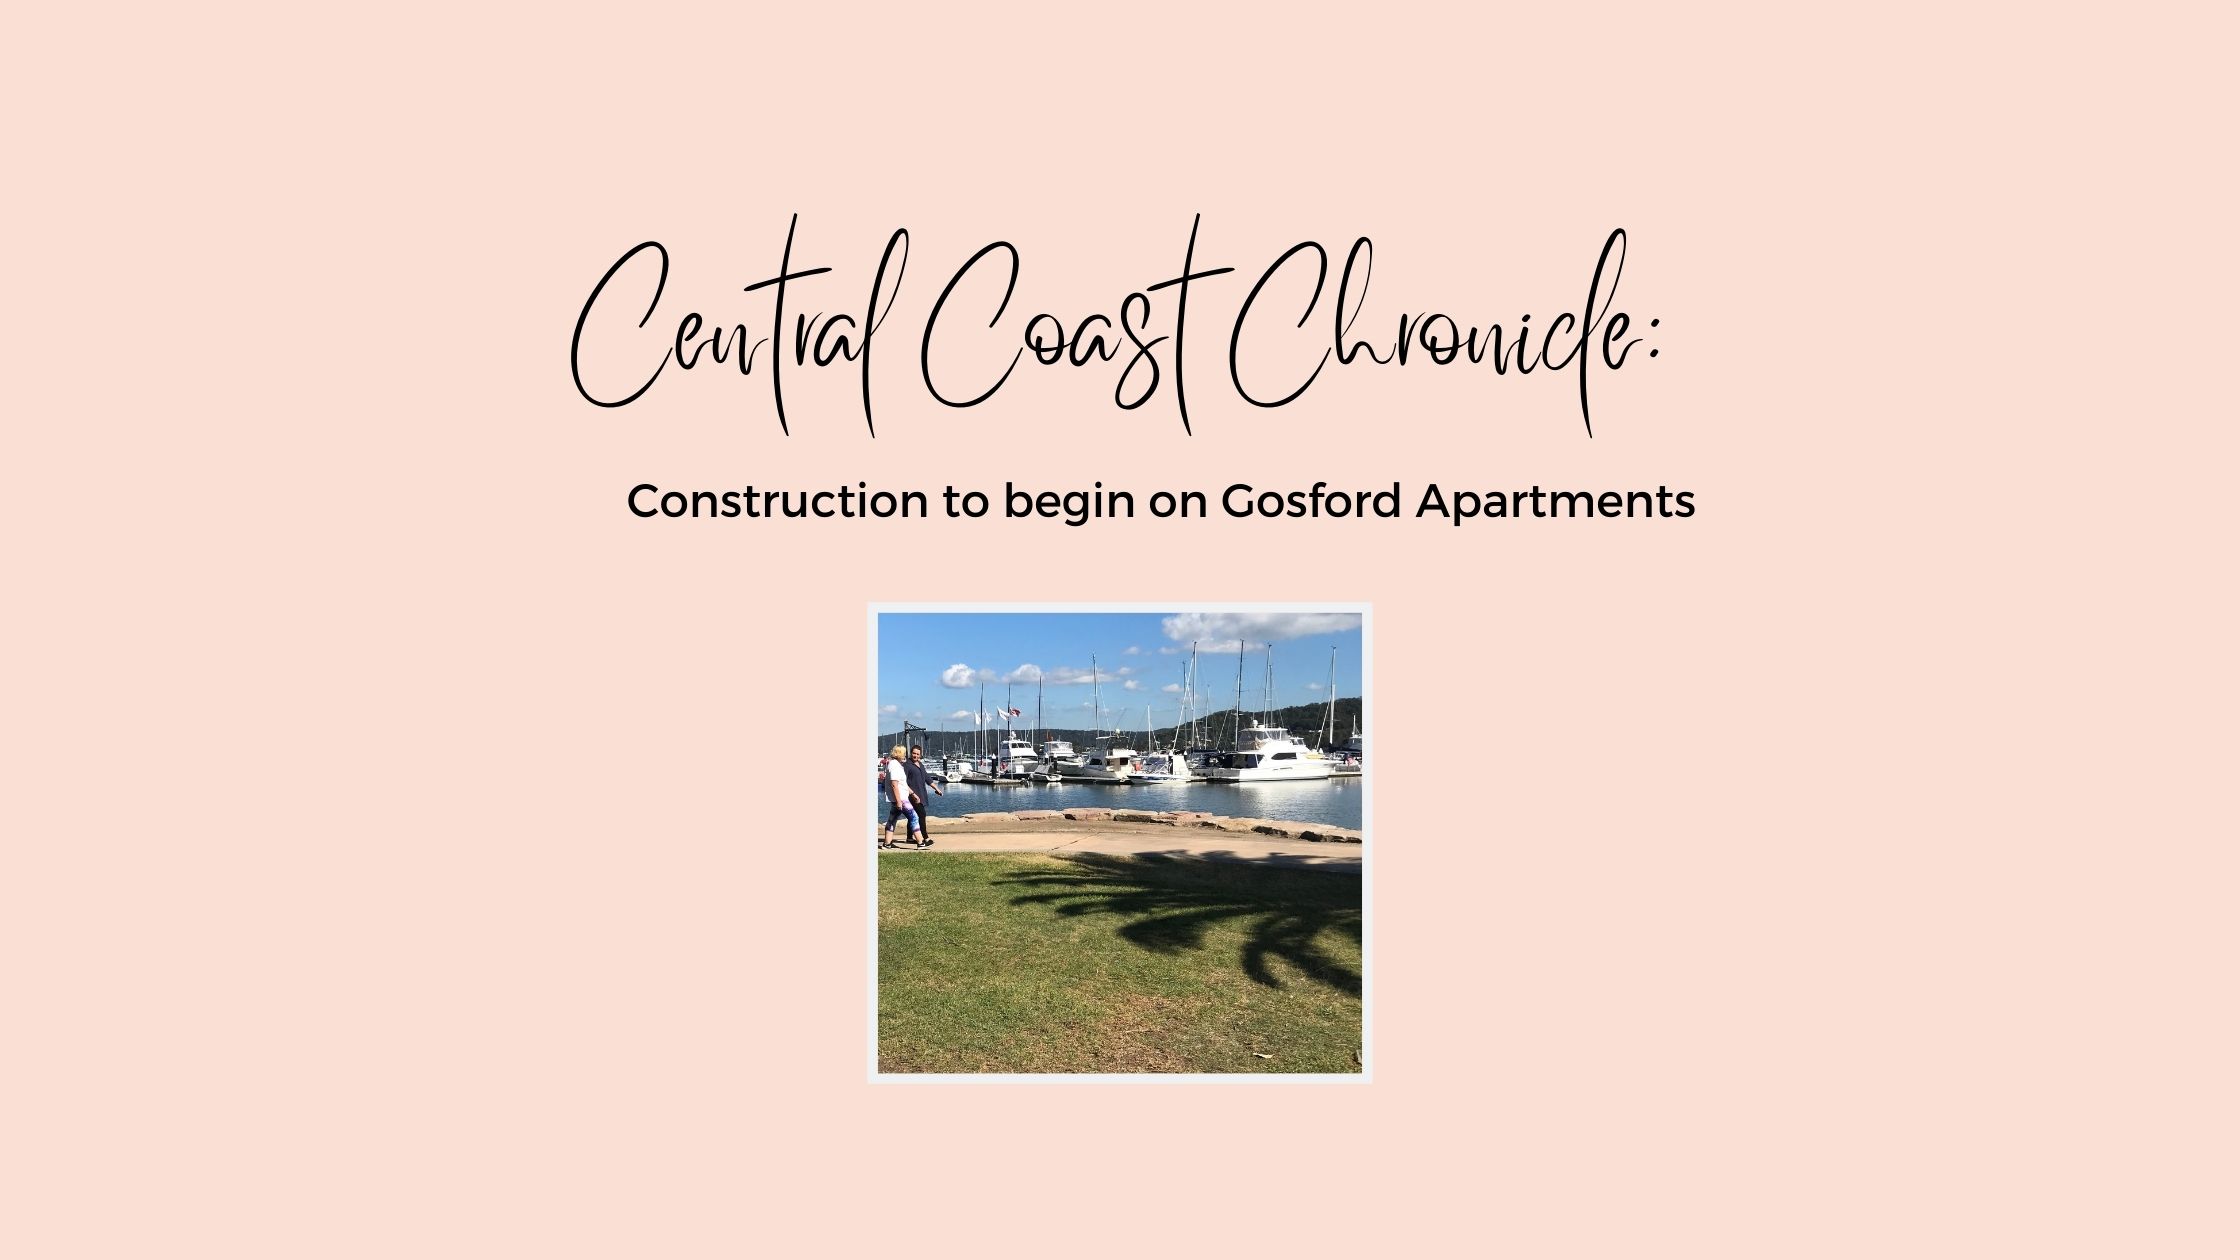 Image of waterfront with boats at Gosford NSW with text reading: Construction to begin on Gosford Apartments